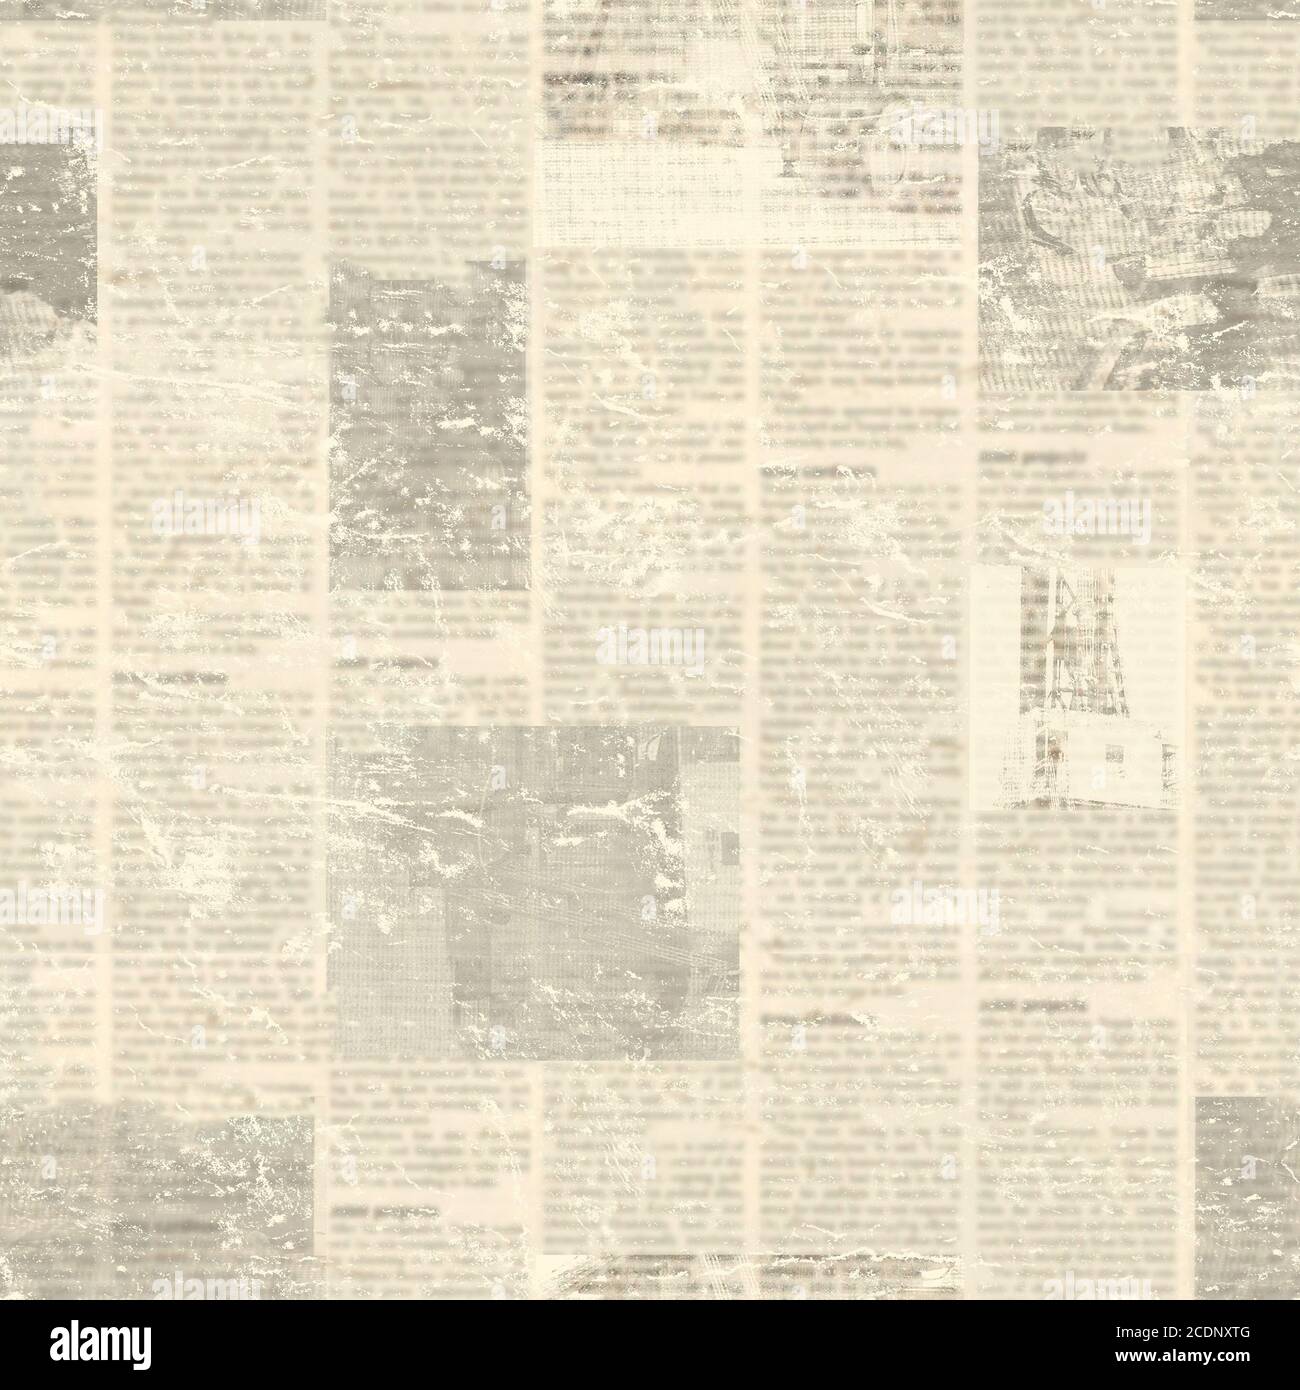 Newspaper Seamless Pattern With Old Unreadable Text And Images Vintage Blurred Paper News Texture Square Background Textured Page Sepia Beige Colla Stock Photo Alamy